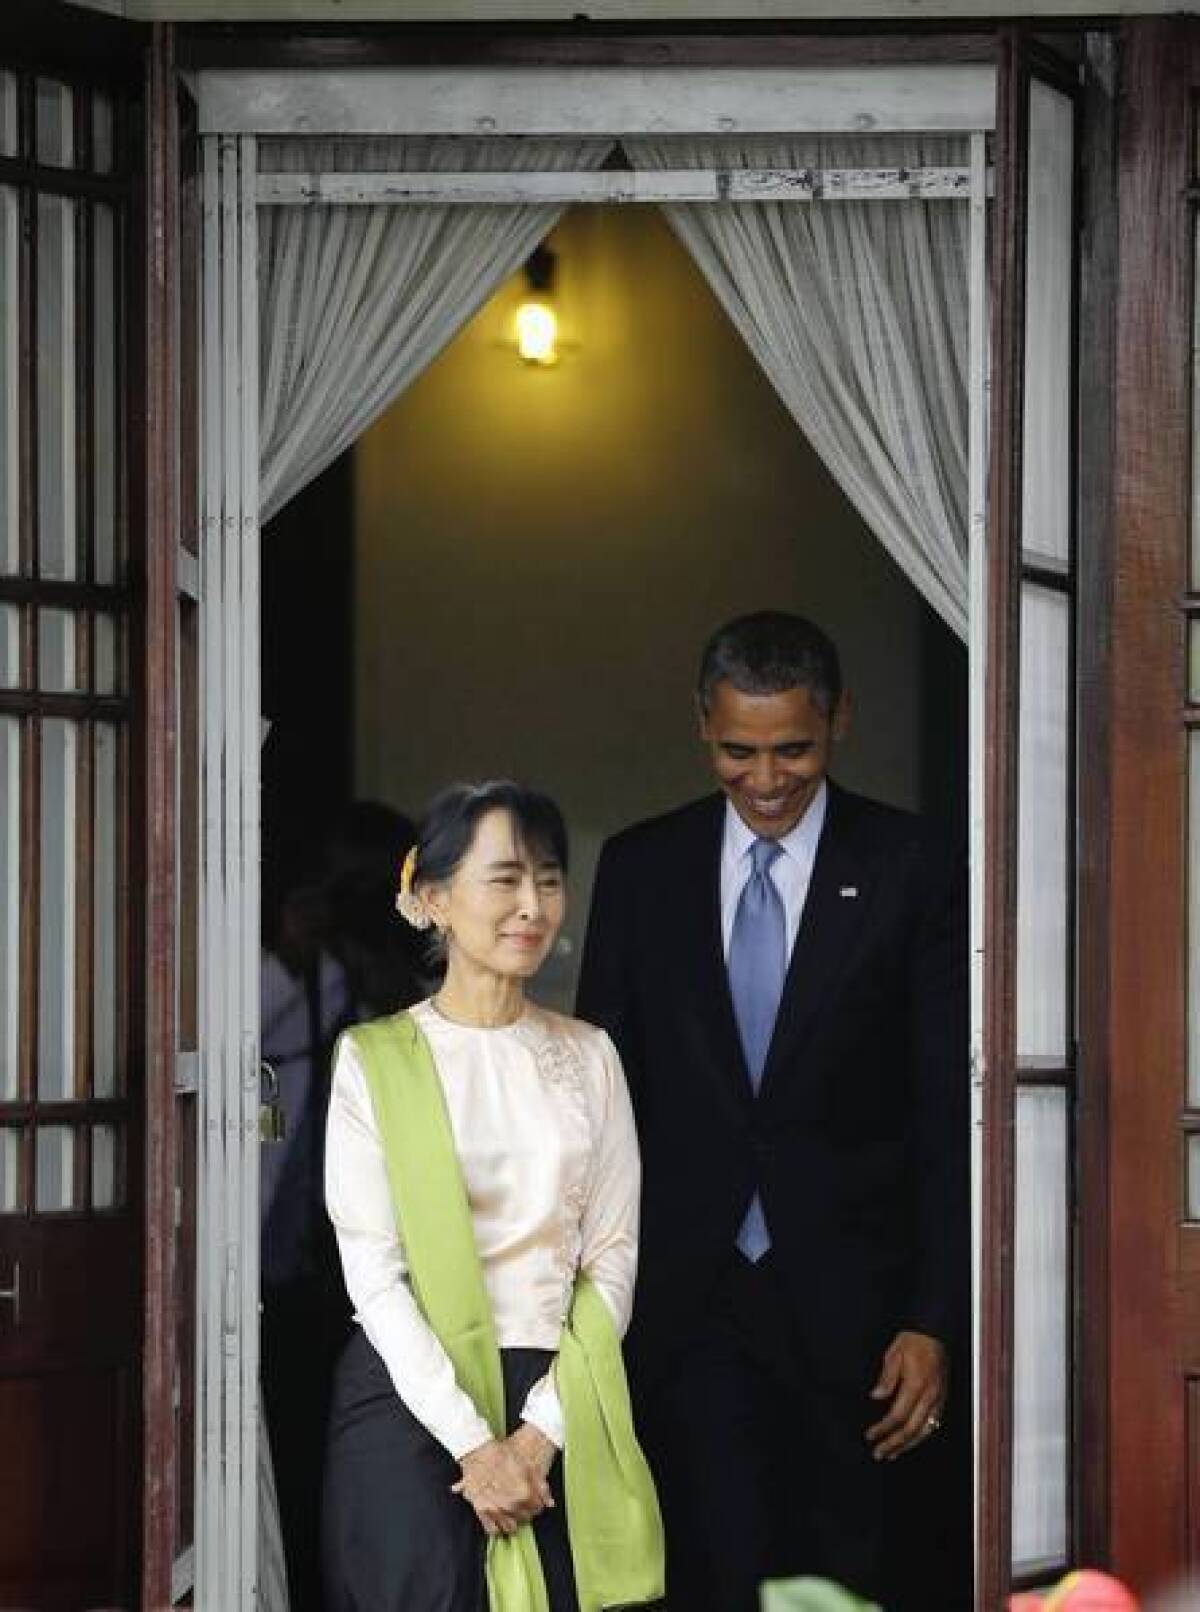 President Obama and Myanmar opposition leader Aung San Suu Kyi prepare to speak to the media at her home in Yangon.